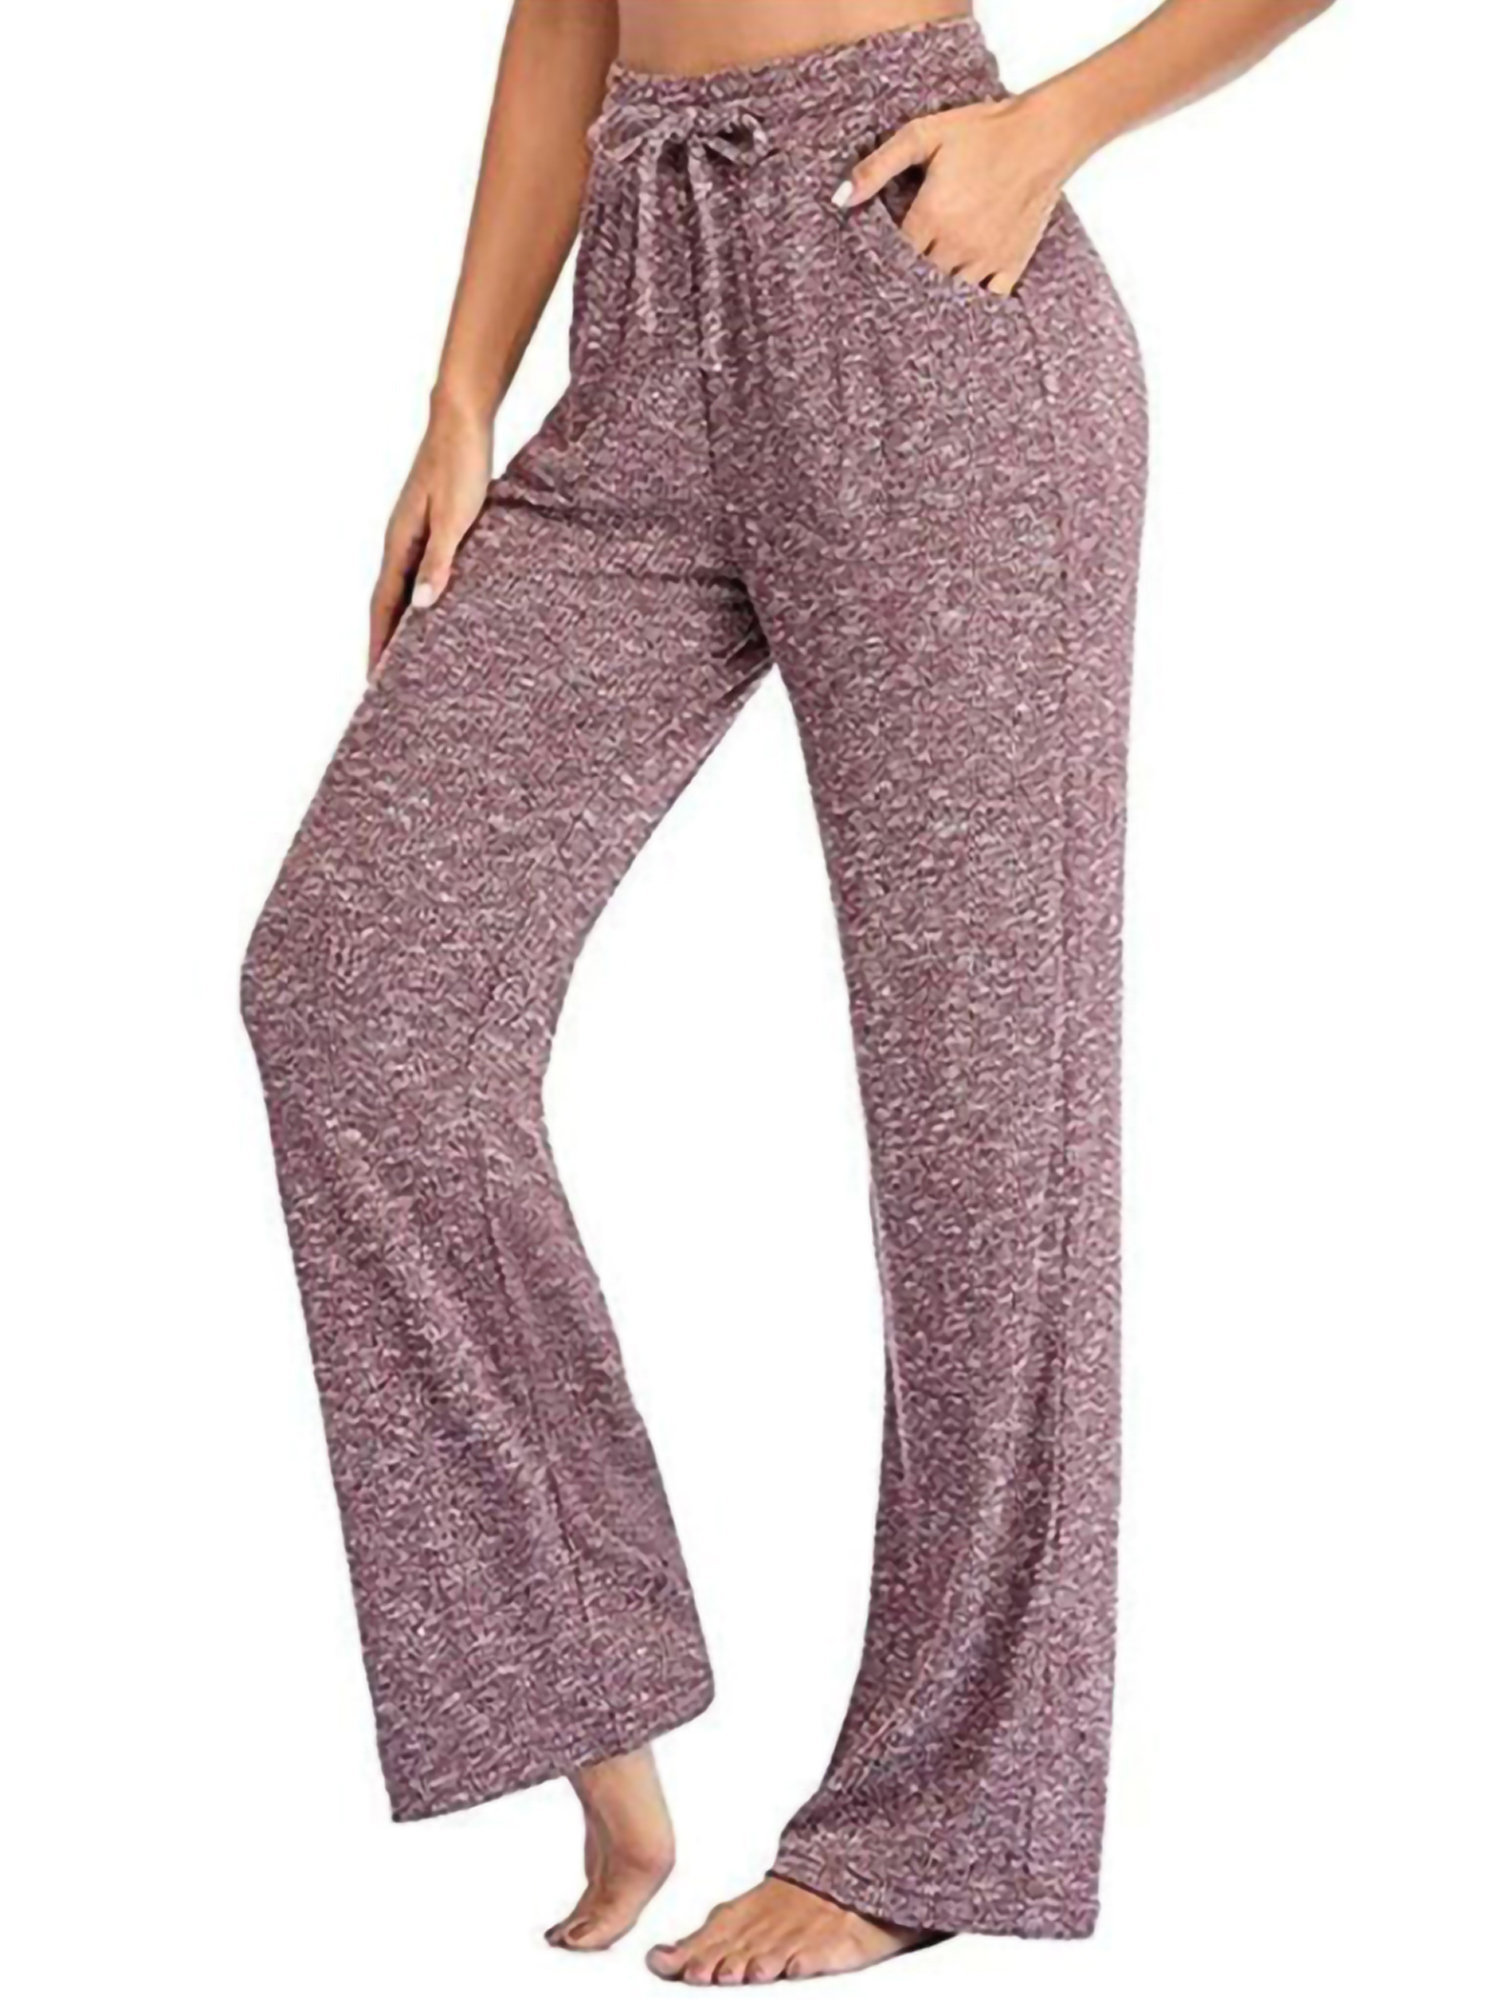 Sexy Dance Women Yoga Pants High Waisted Casual Sweatpant Elastic Waist Wide Leg Pant Plus Size Stretch Workout Pants Running Joggers Sportswear with Pockets - image 1 of 5